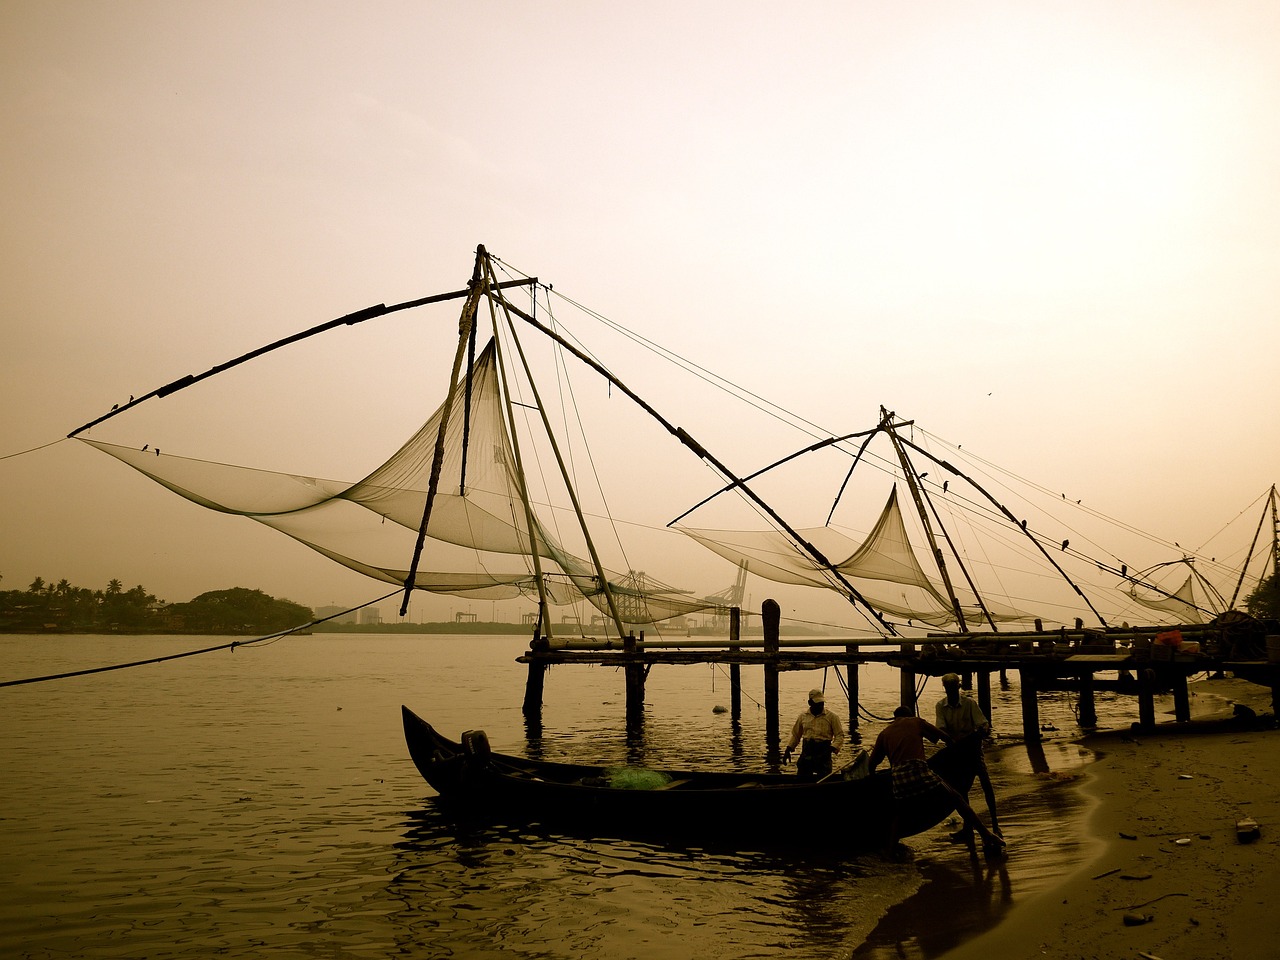 7-Day Kerala Cultural and Nature Tour